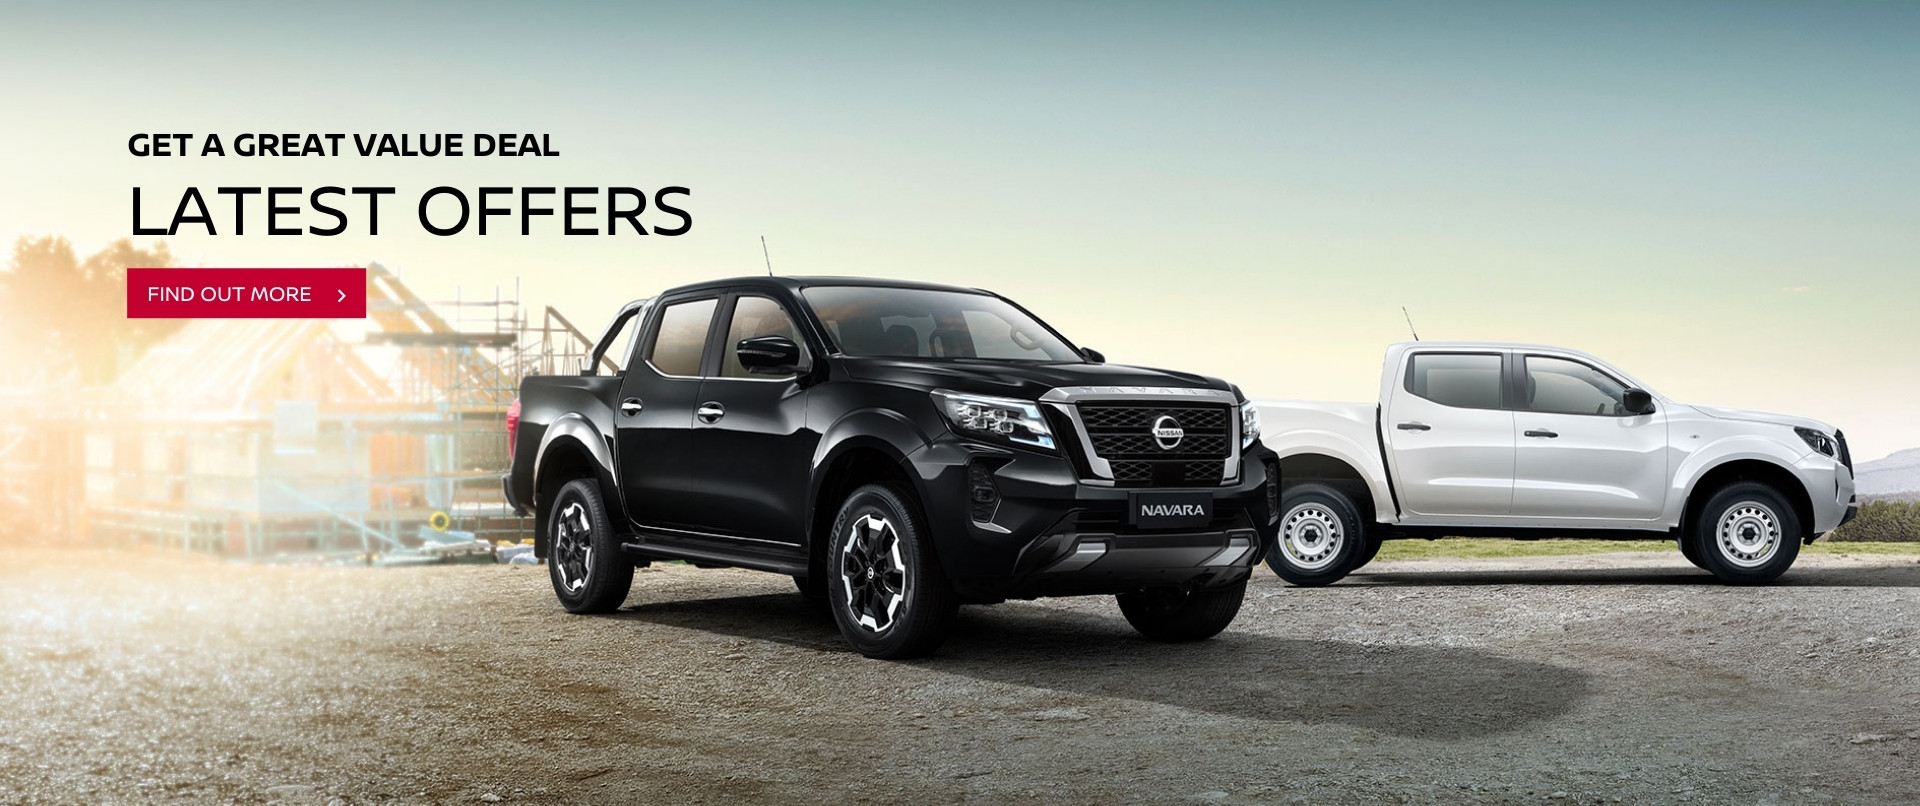 Nissan Pathfinder - 7 Year Warranty and Roadside Assist on selected models